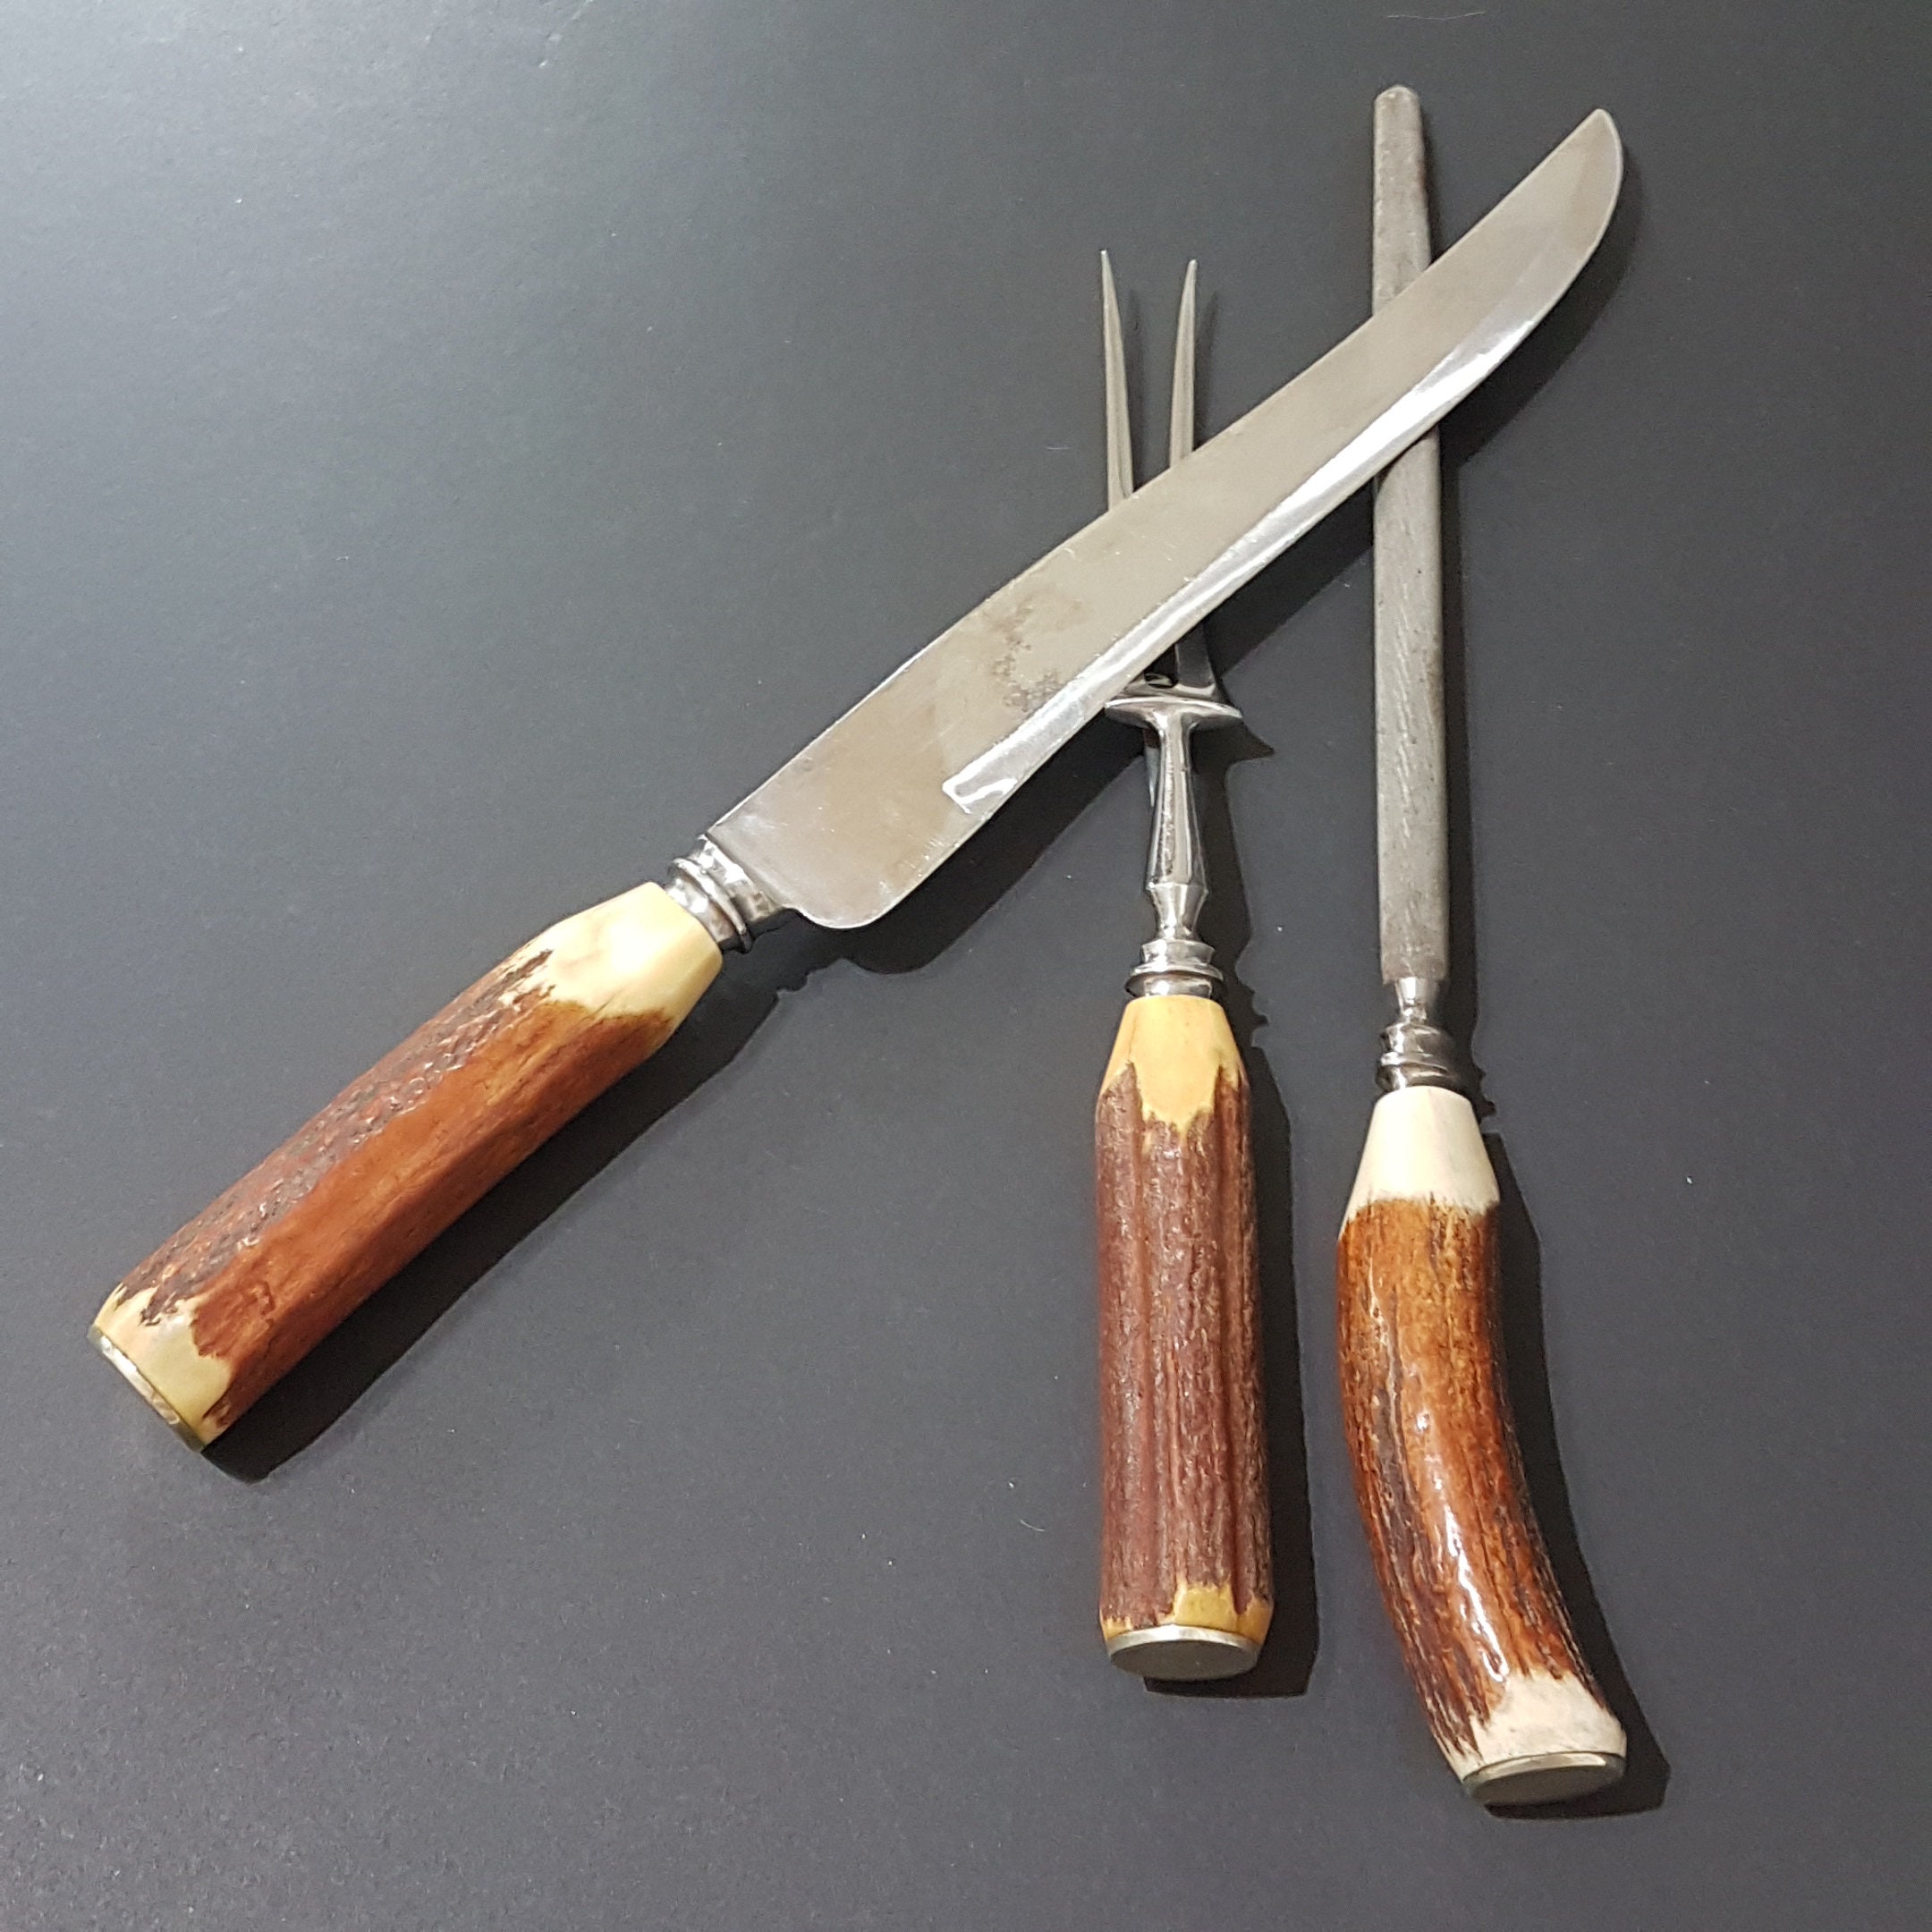 Vintage Sheffield carving knife set horse head handles stainless